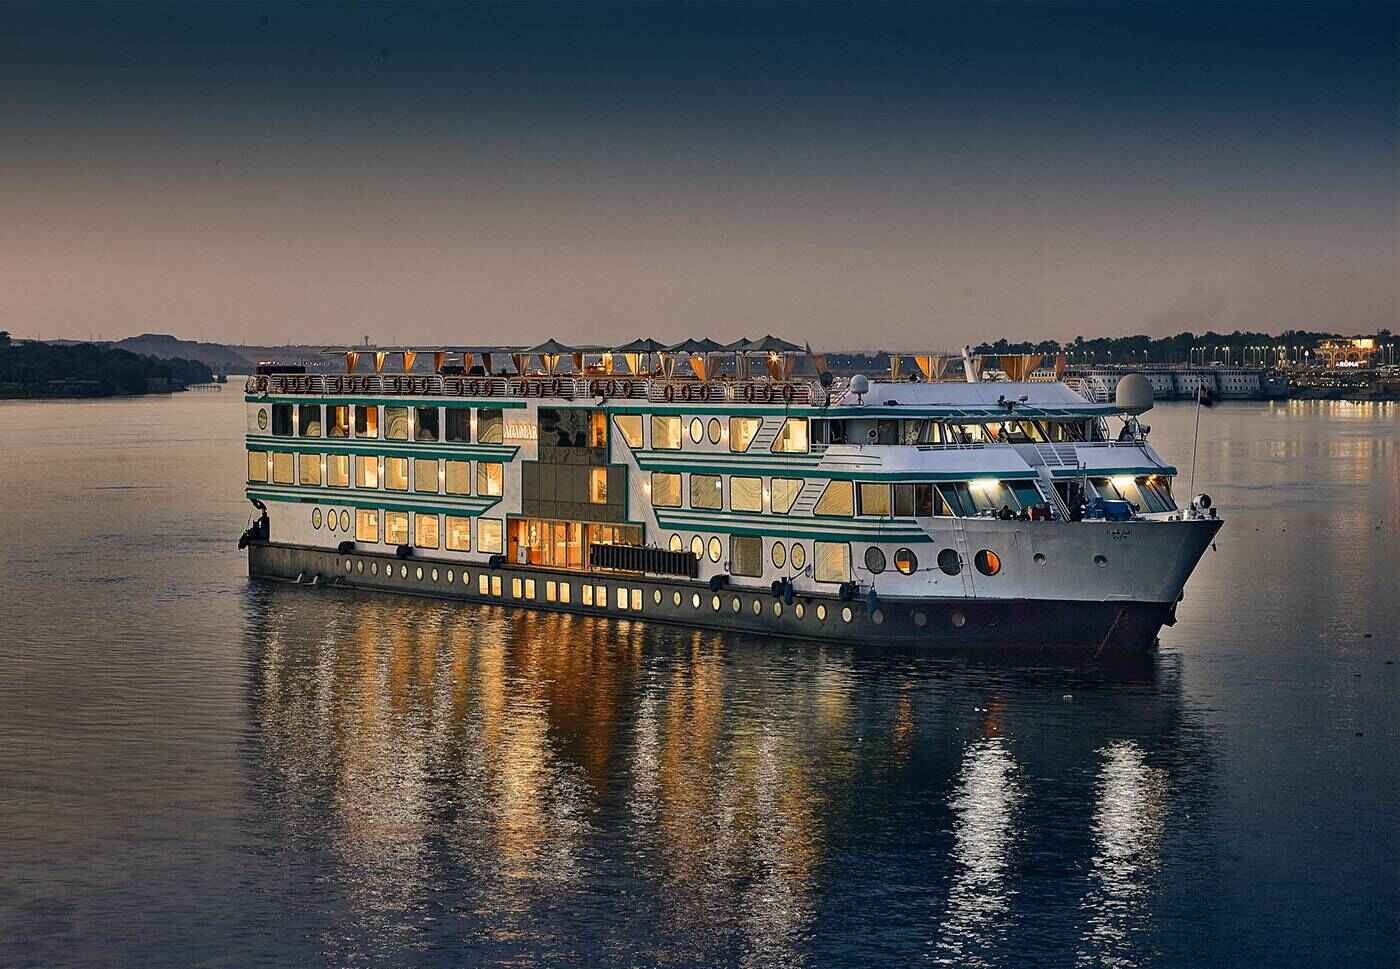 Why embark on a Nile River cruise?